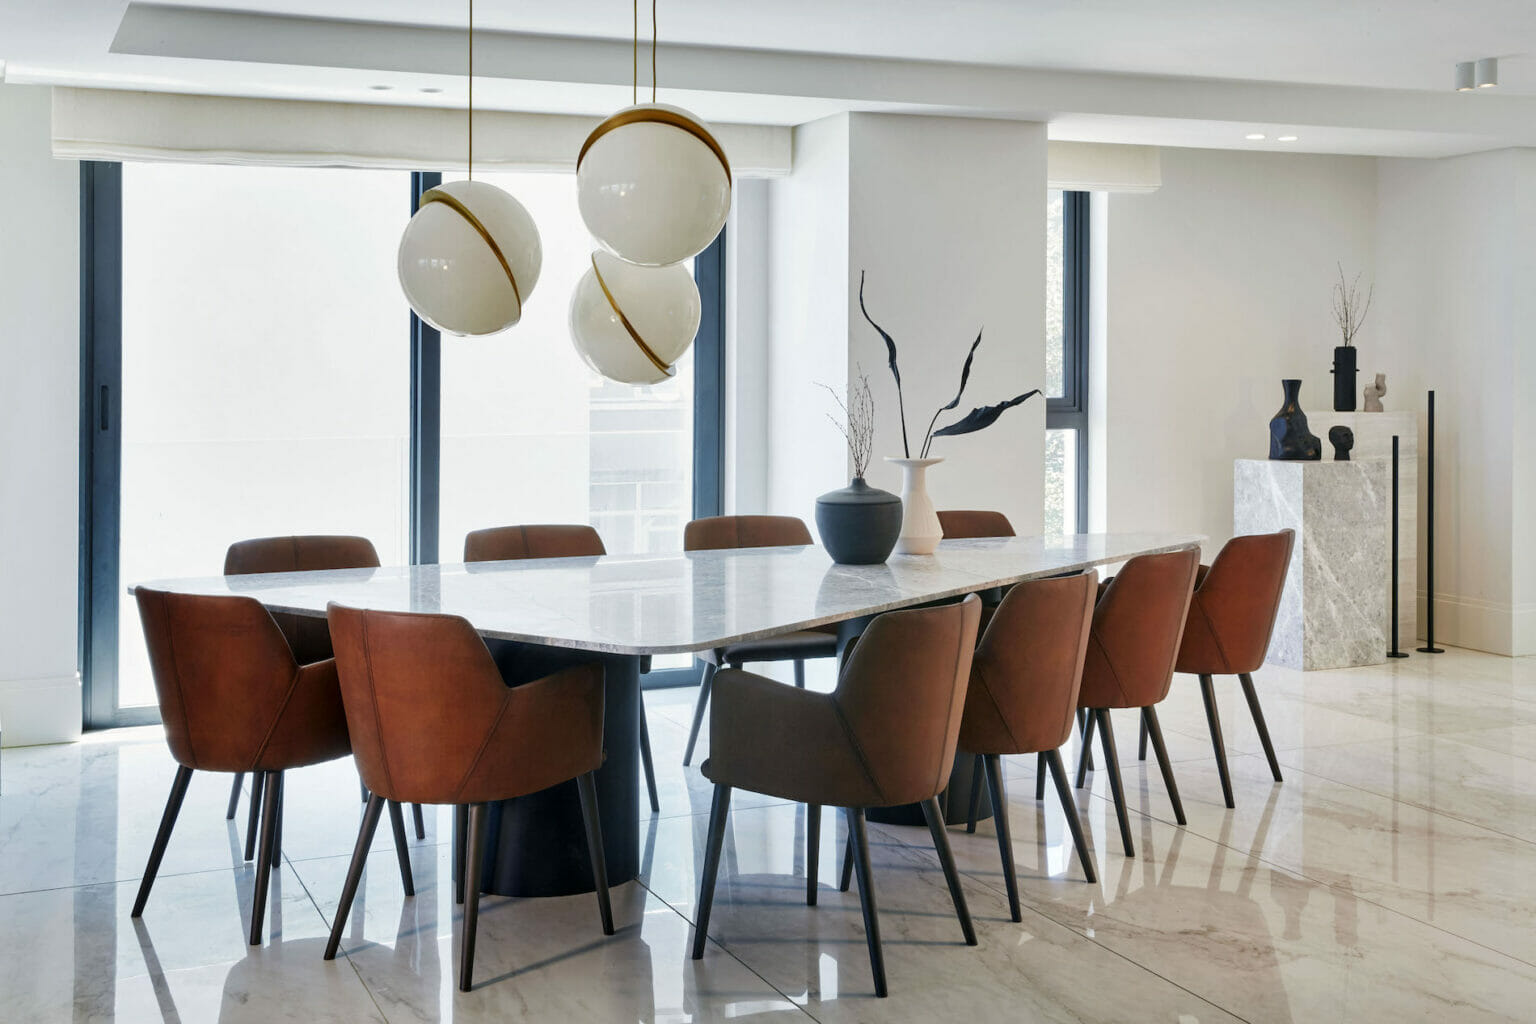 Marble dining room table surrounded by leather chairs underneath unique pendant lights